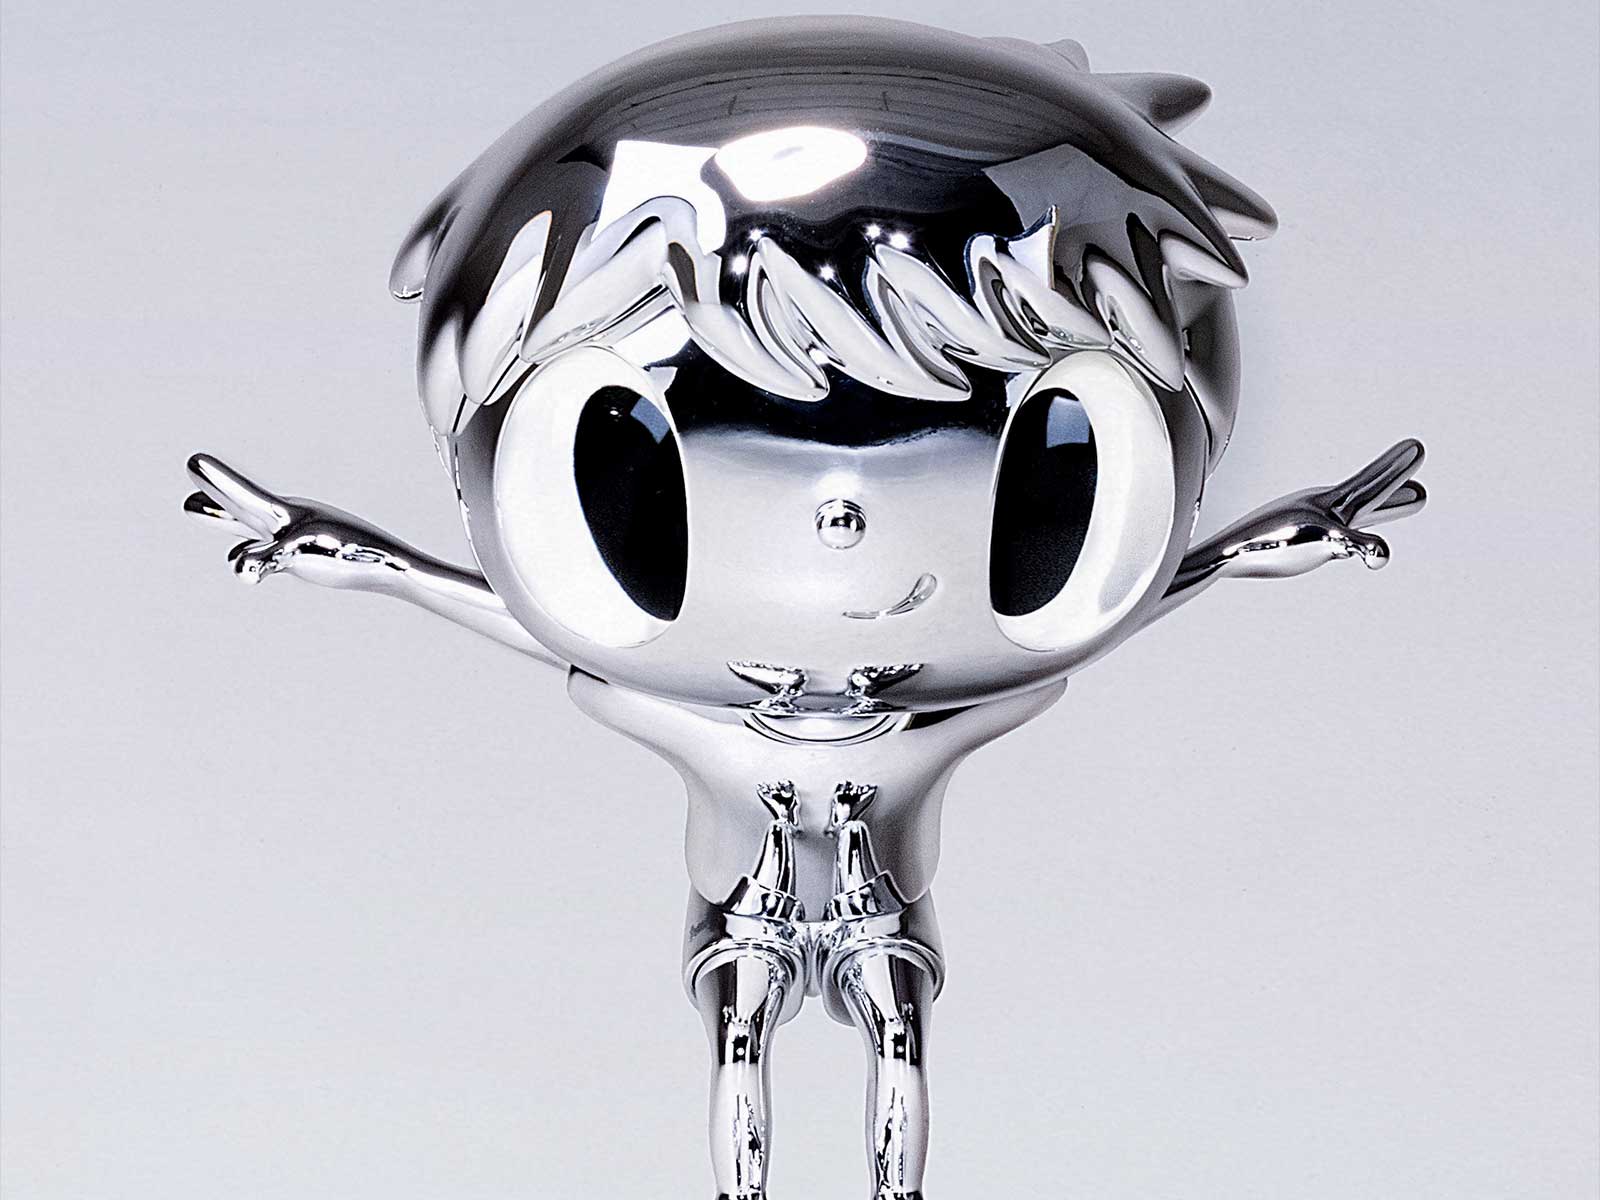 Javier Calleja teams up with Rolls-Royce to create a sculpture of the legendary ‘Ghost’